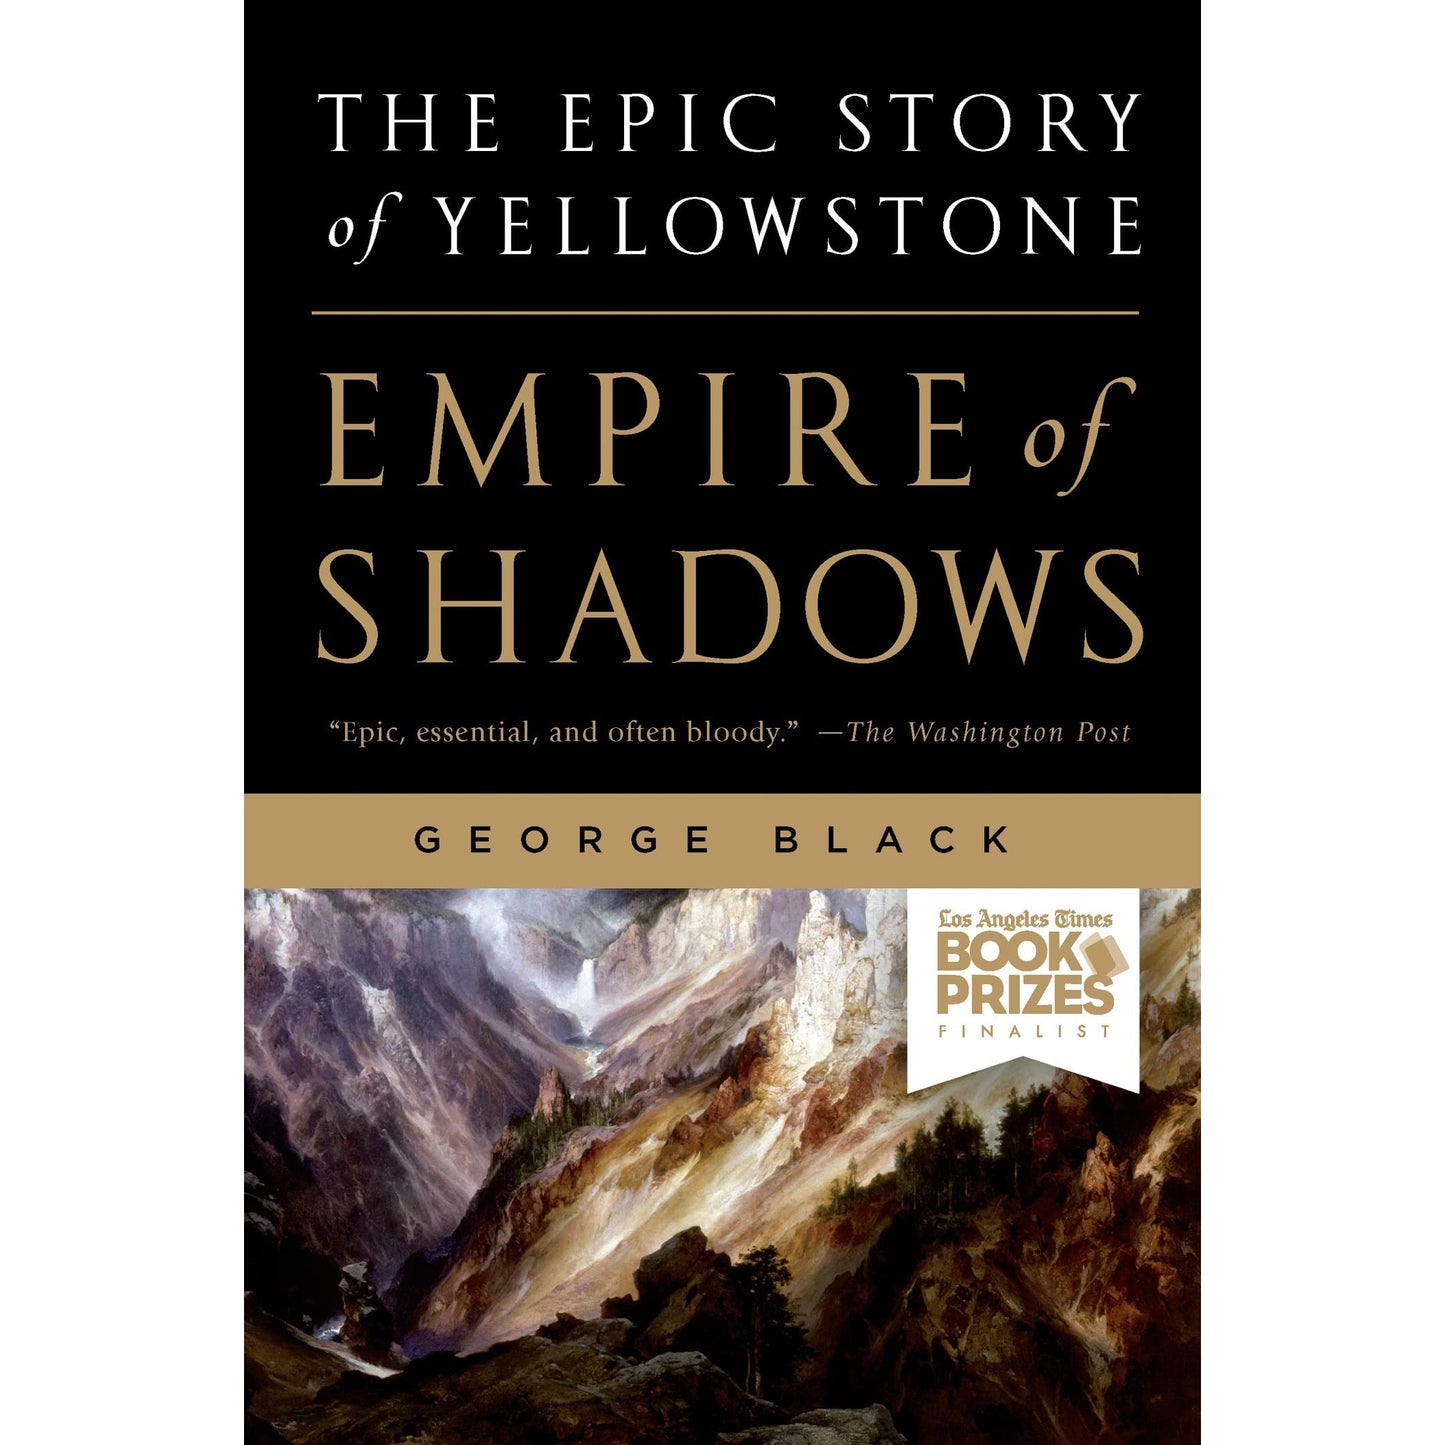 Empire Of Shadows: The Epic Story of Yellowstone by George Black